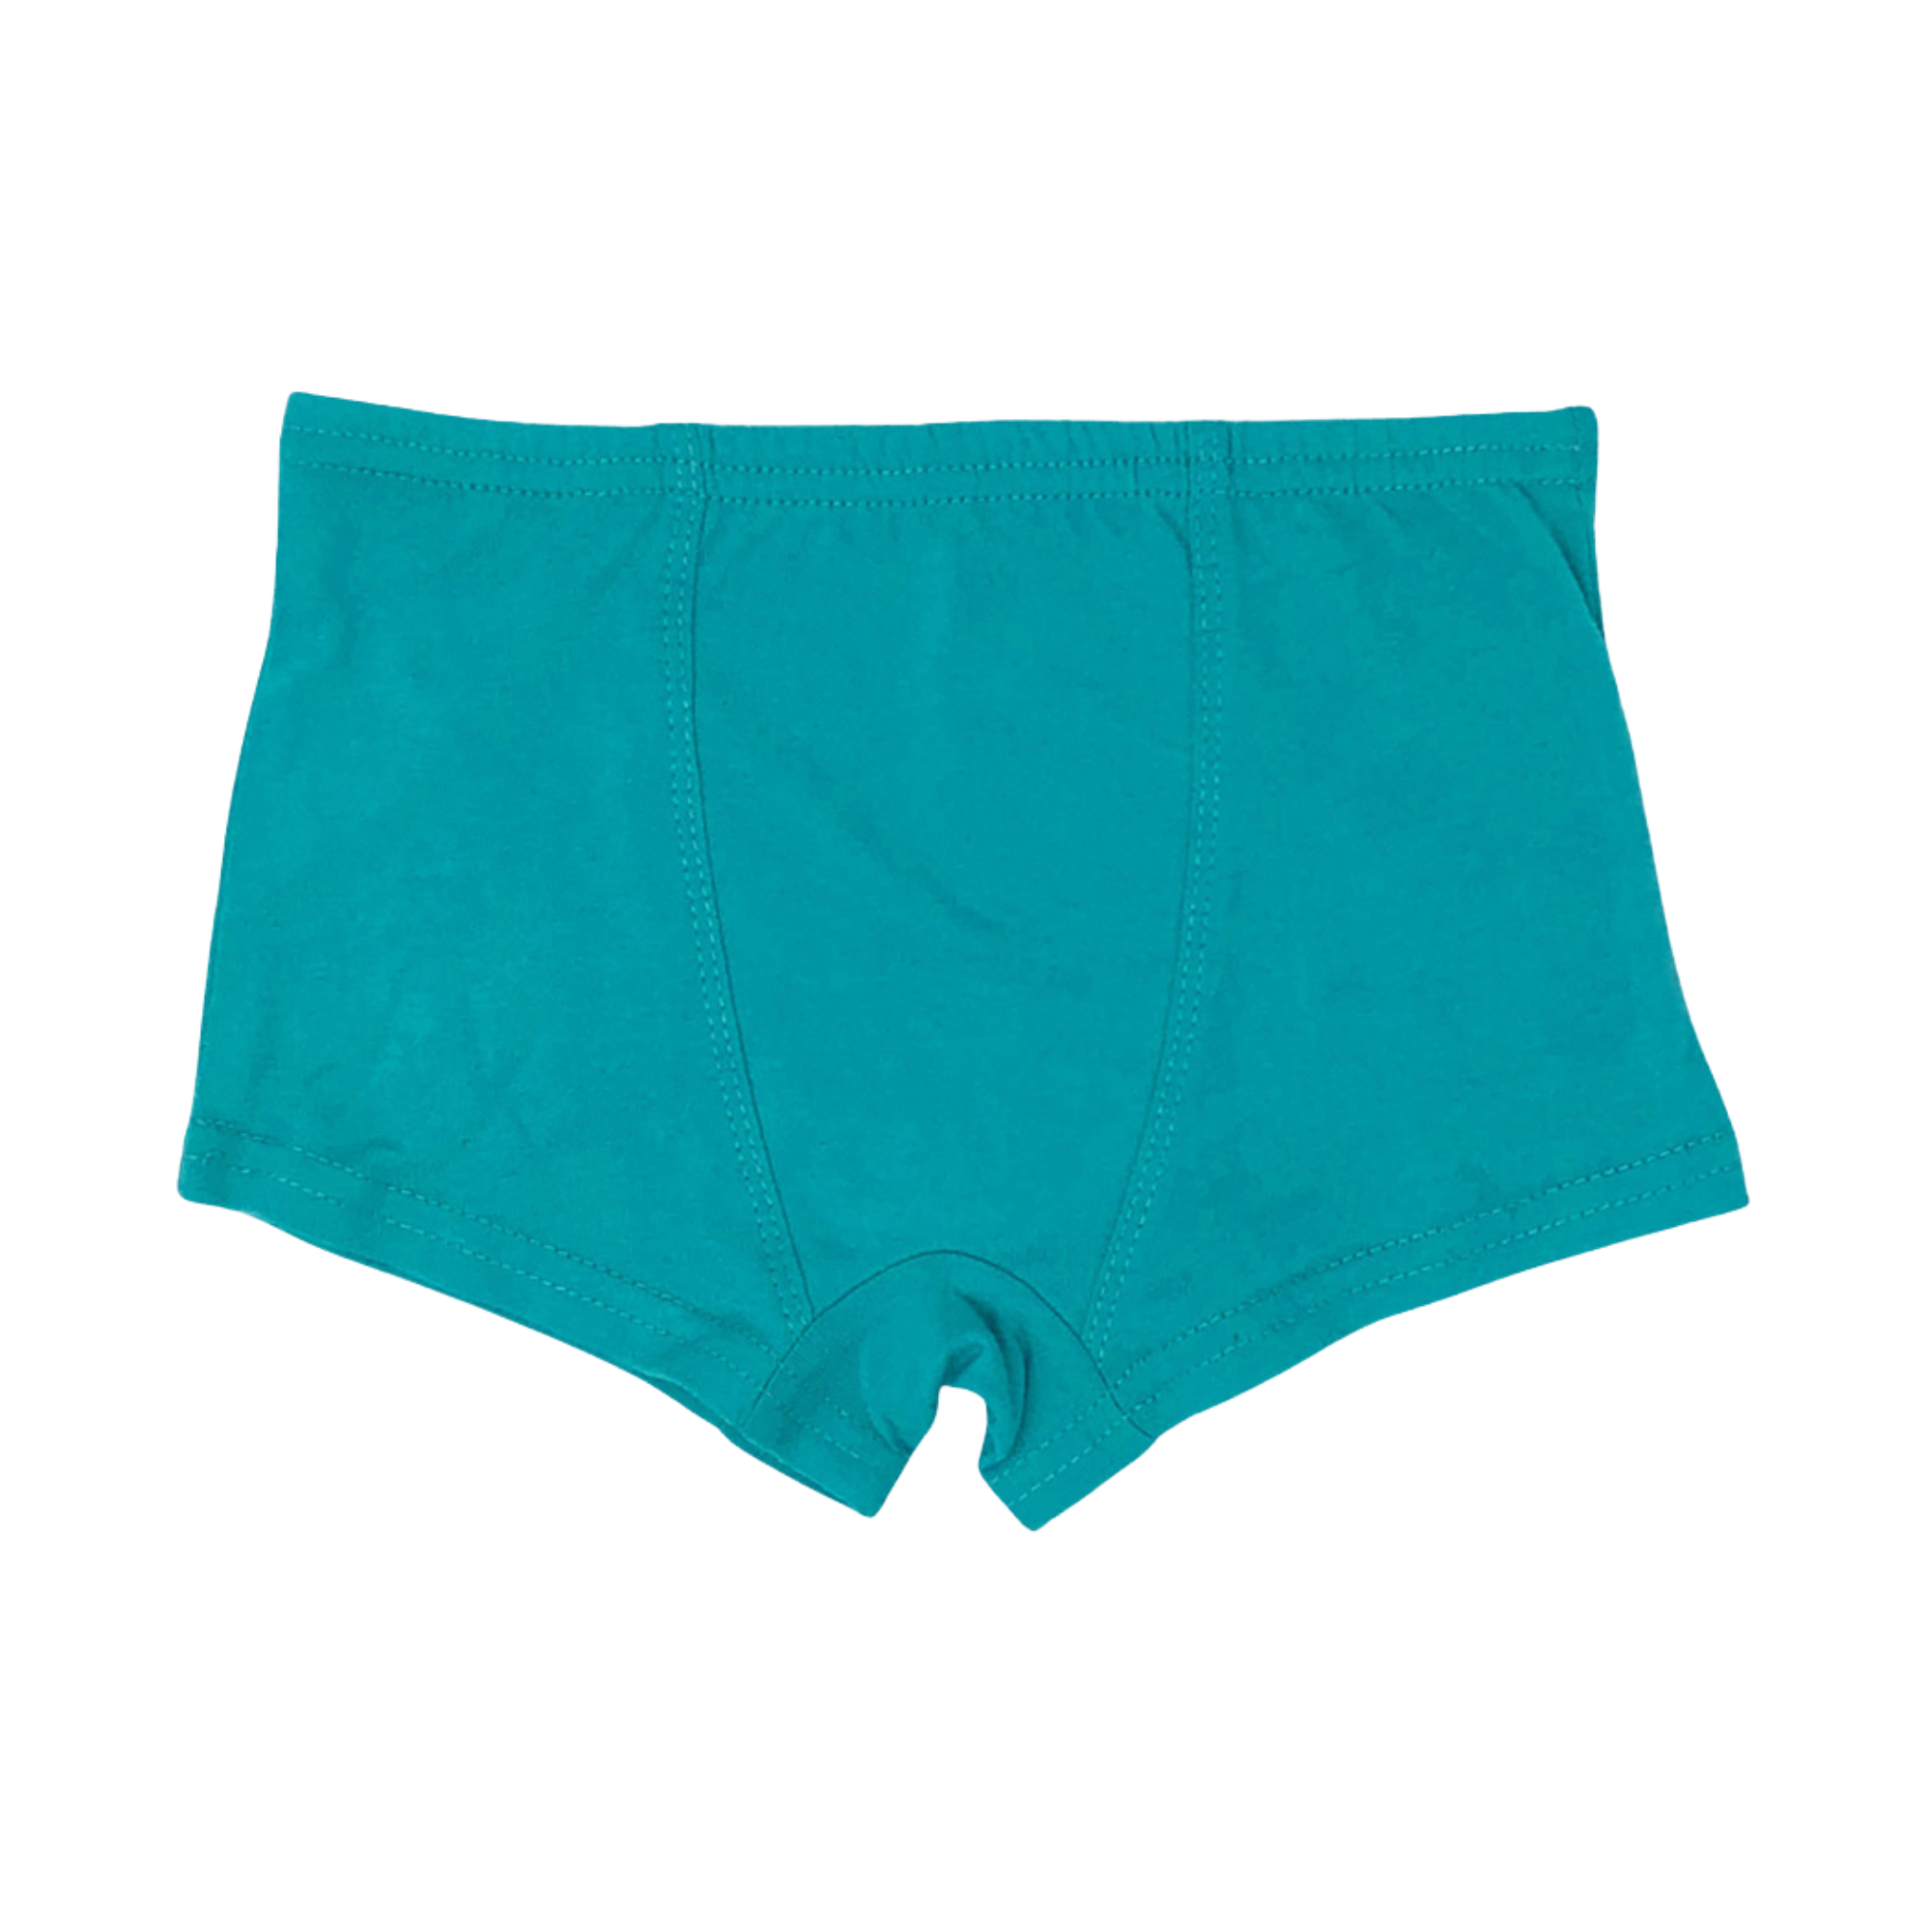 Tiny Boxers - small cotton boxer briefs, 3-pack